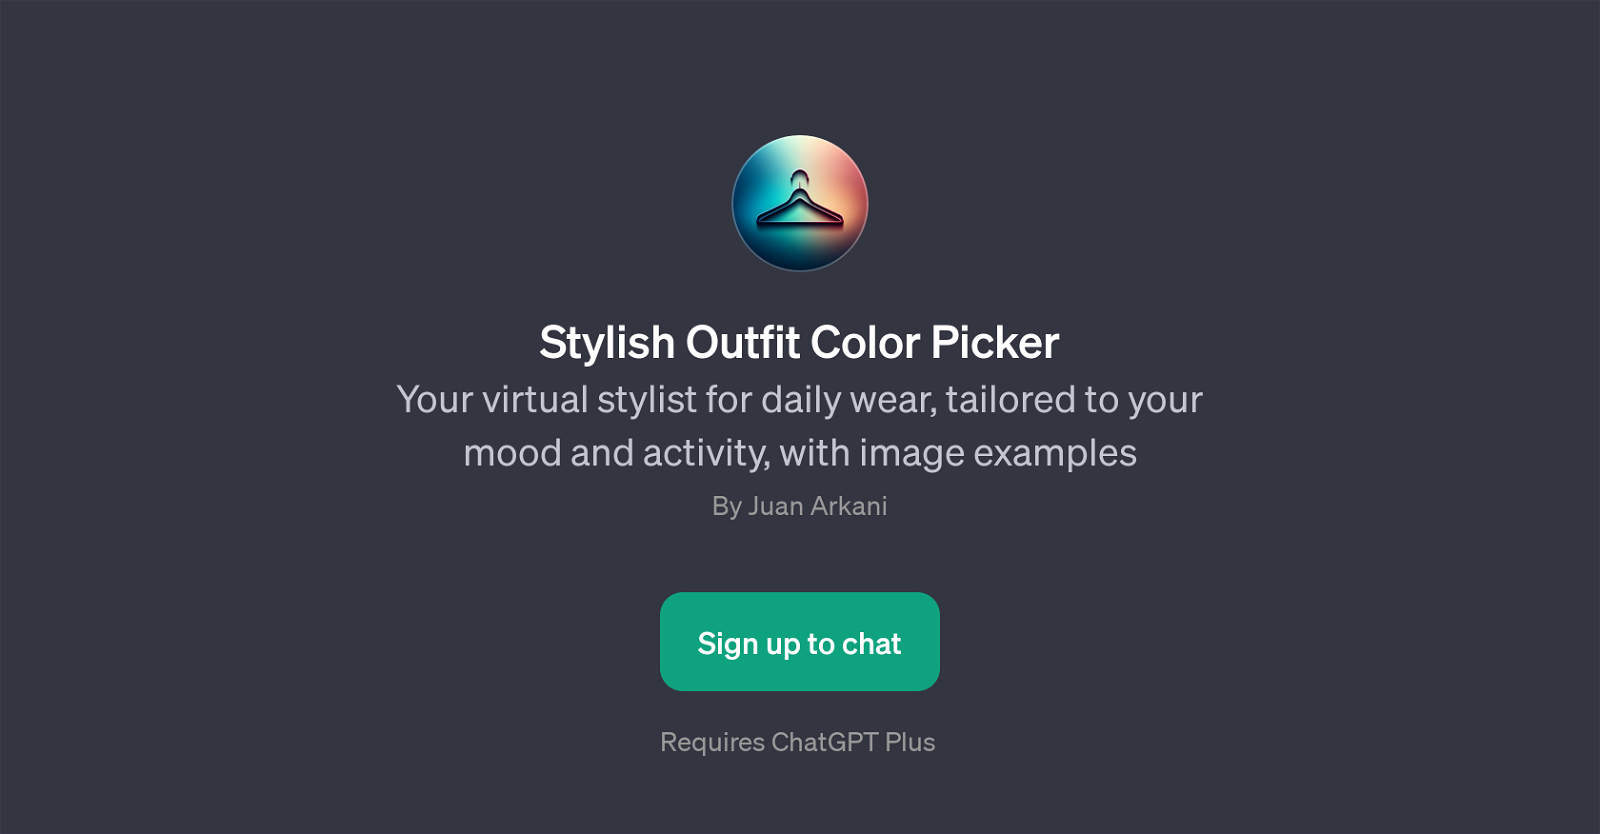 Stylish Outfit Color Picker website